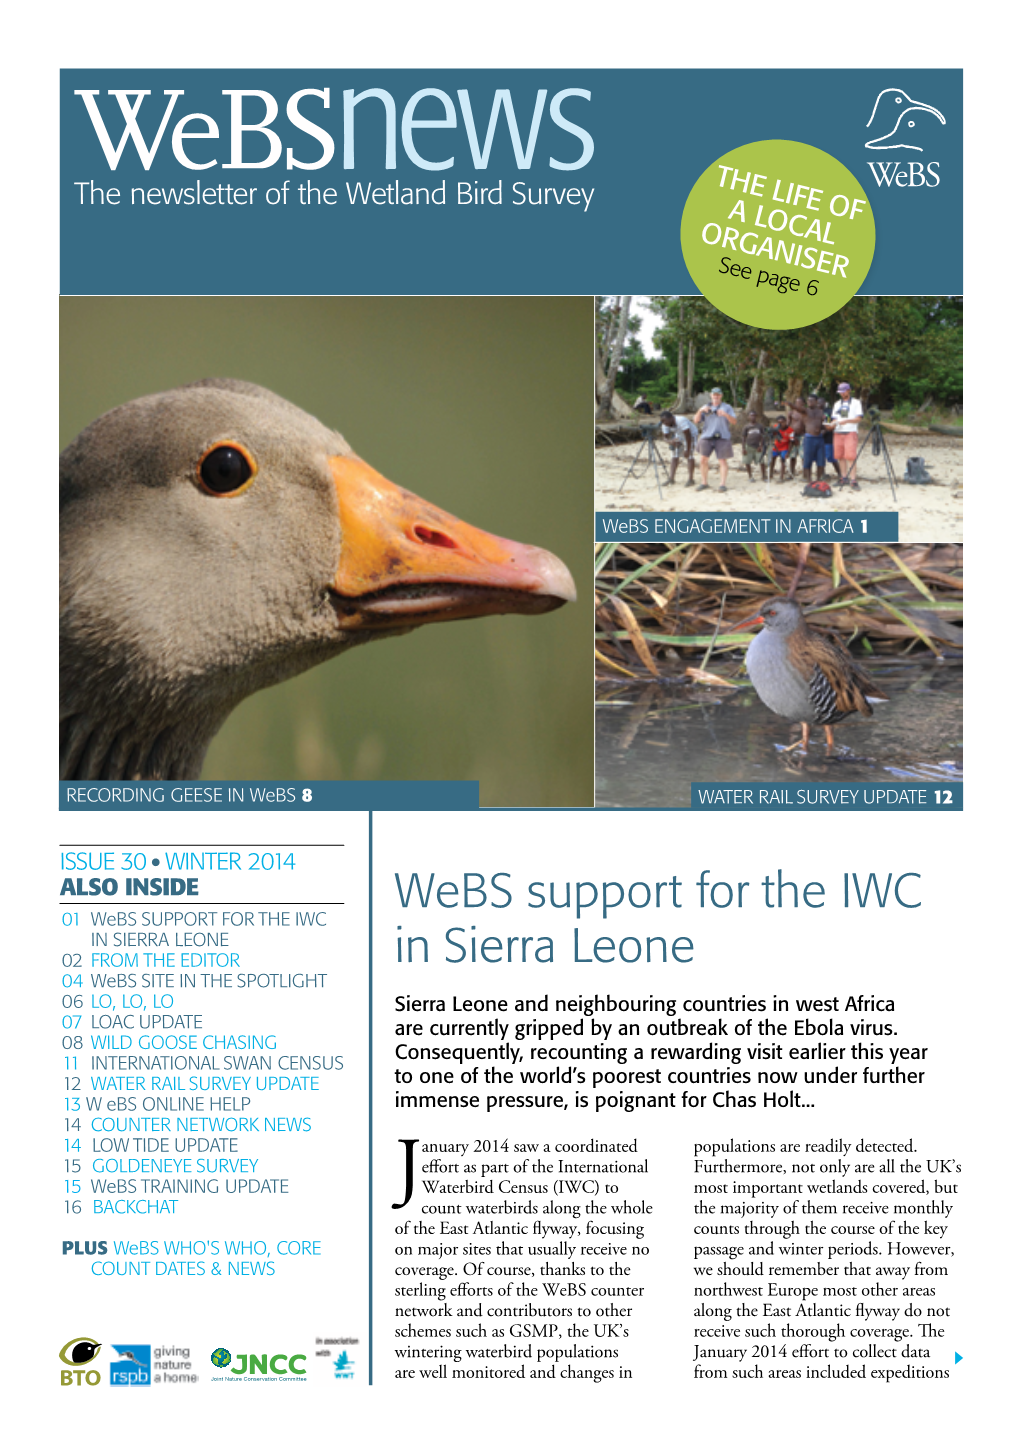 Webs Support for the IWC in Sierra Leone